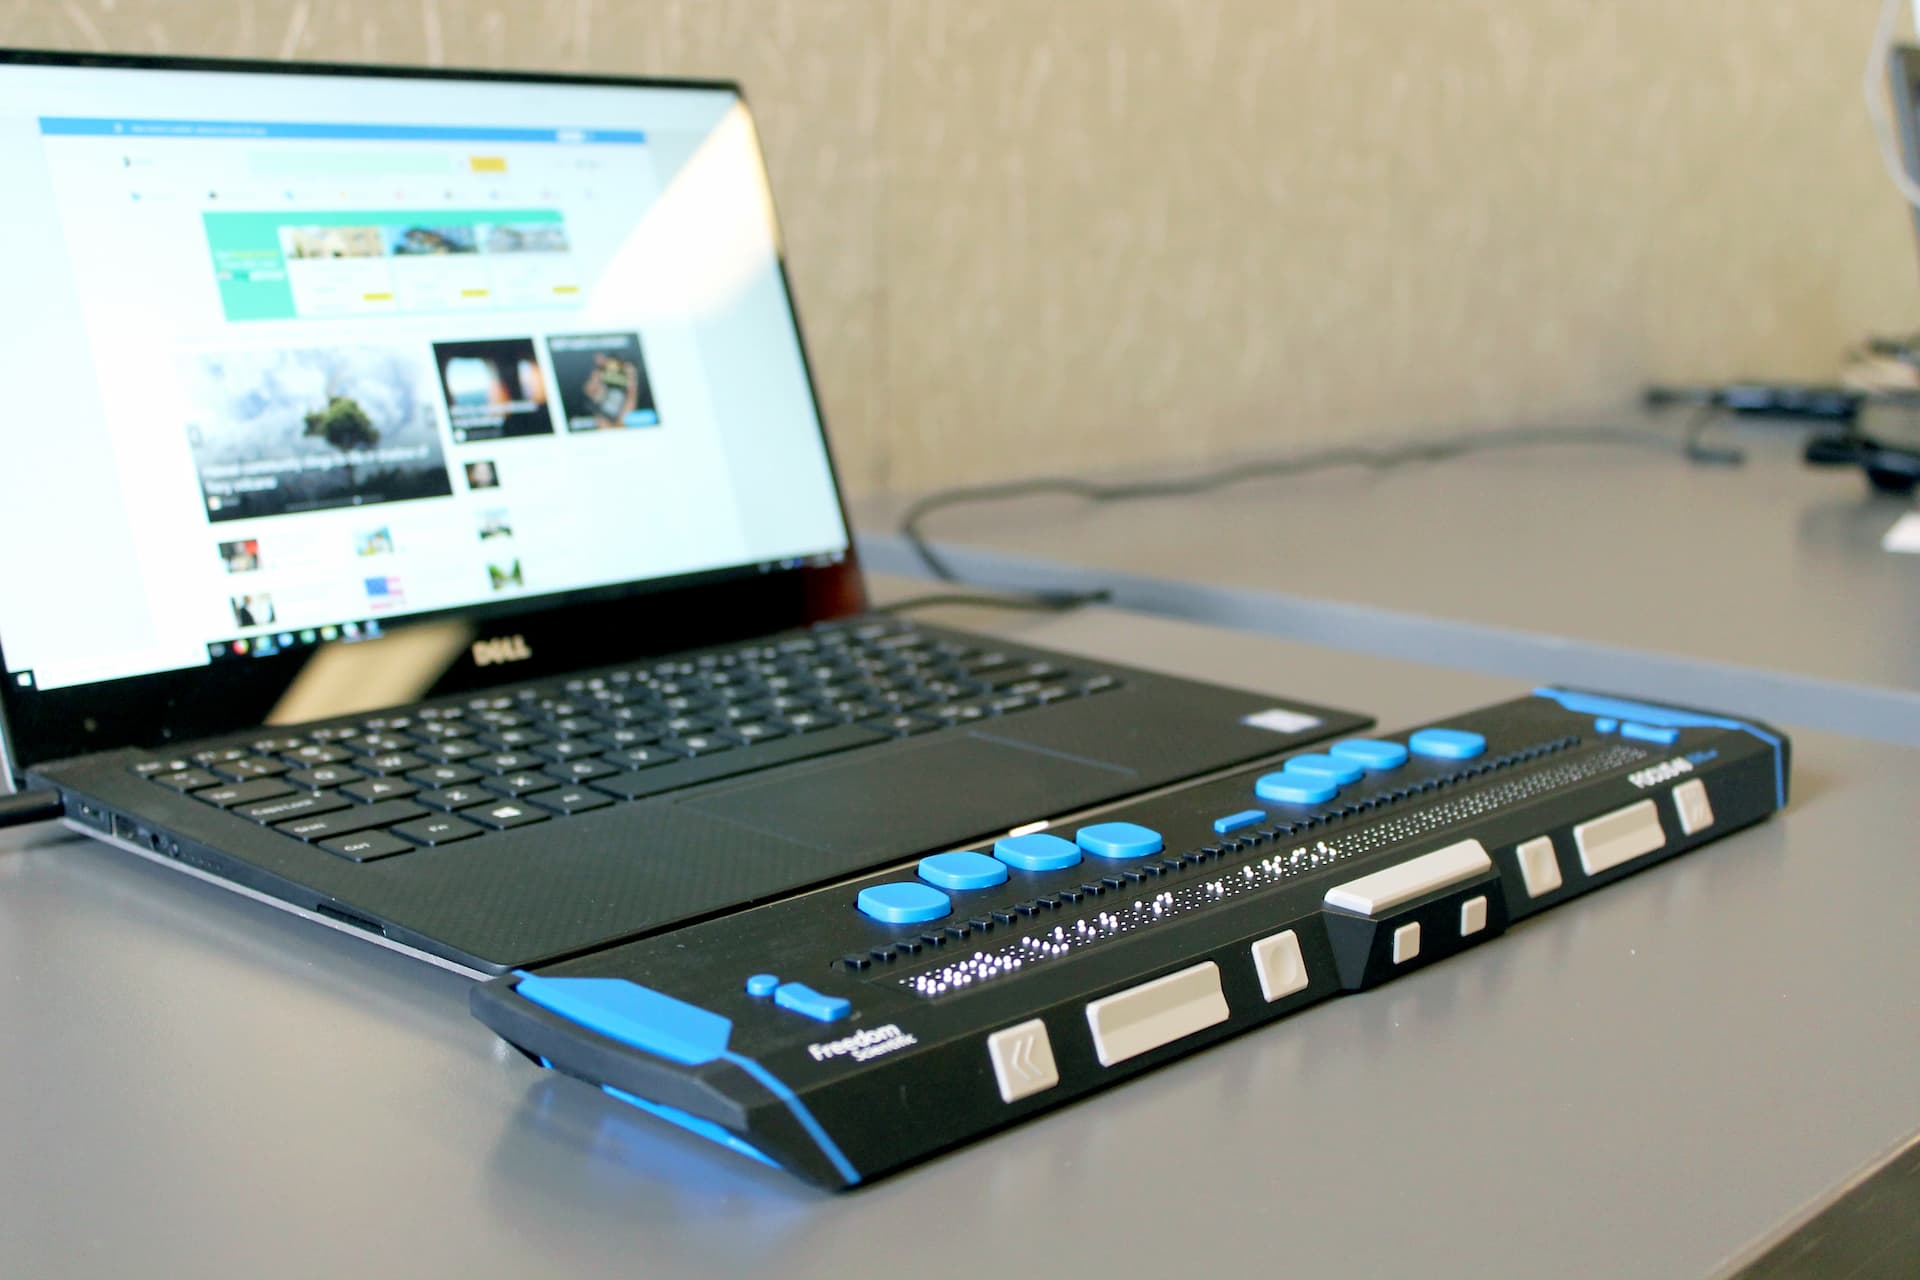 A laptop computer with an adaptive keyboard attached for low vision or no vision users